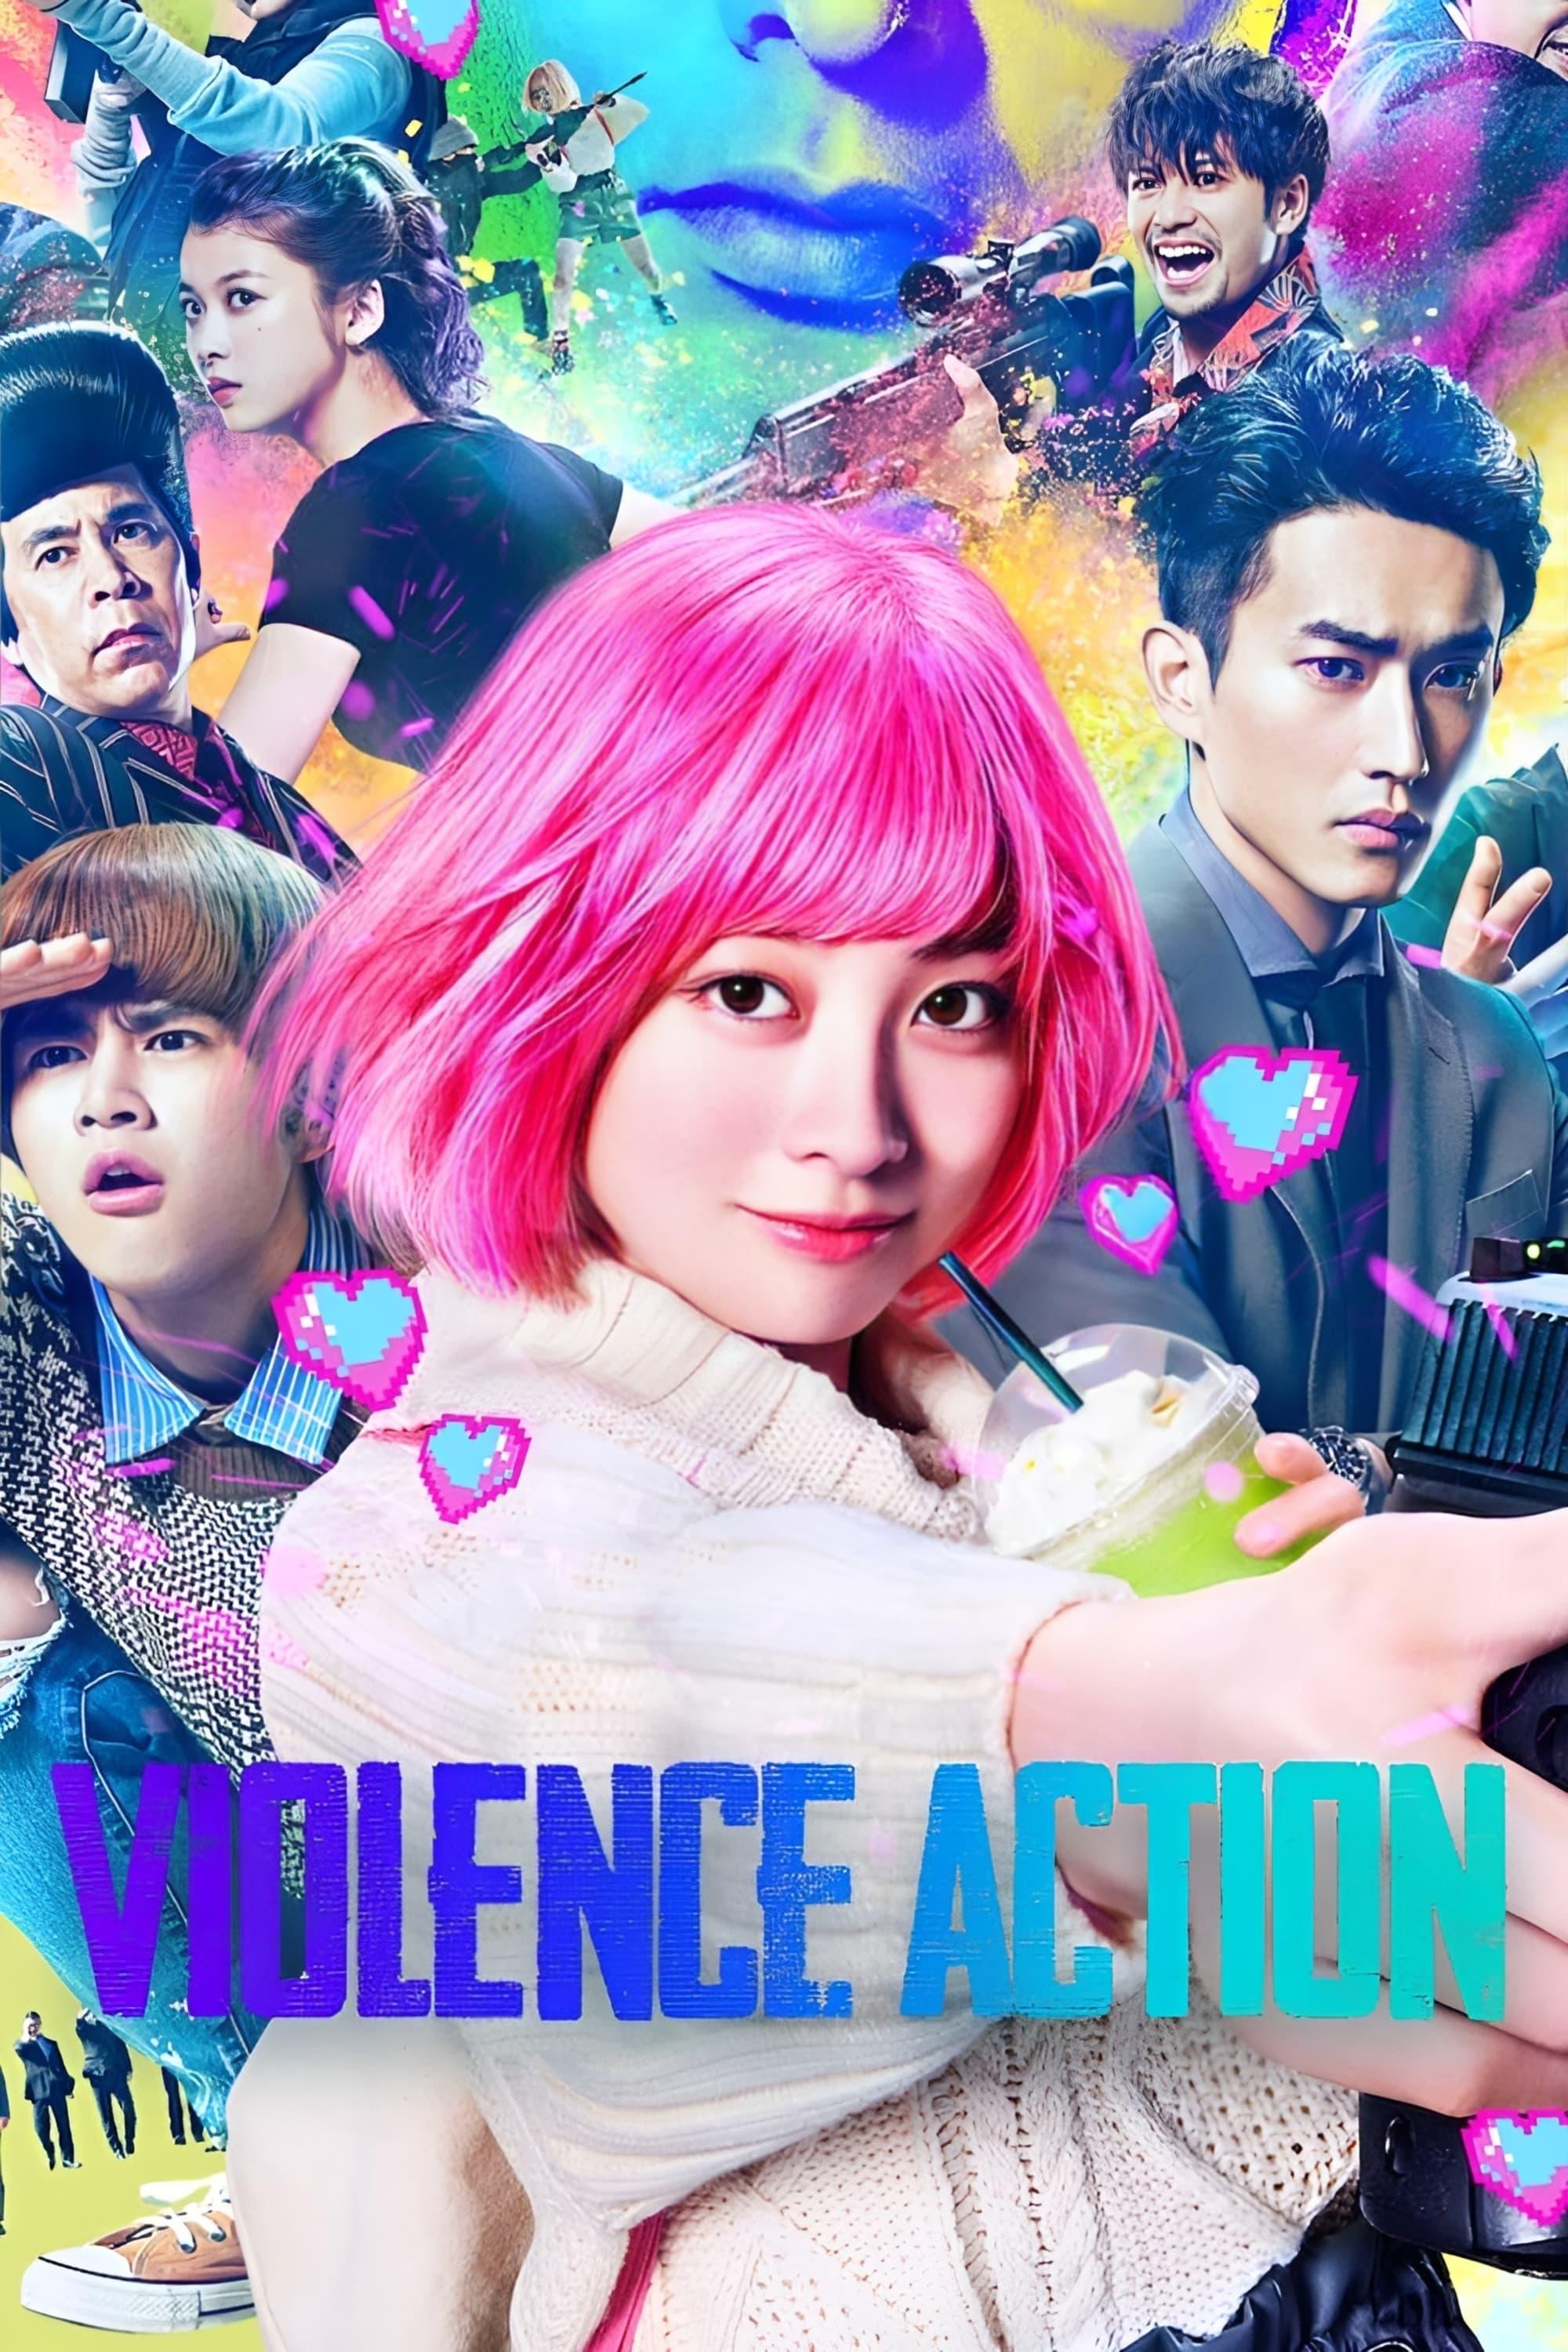 The Violence Action poster